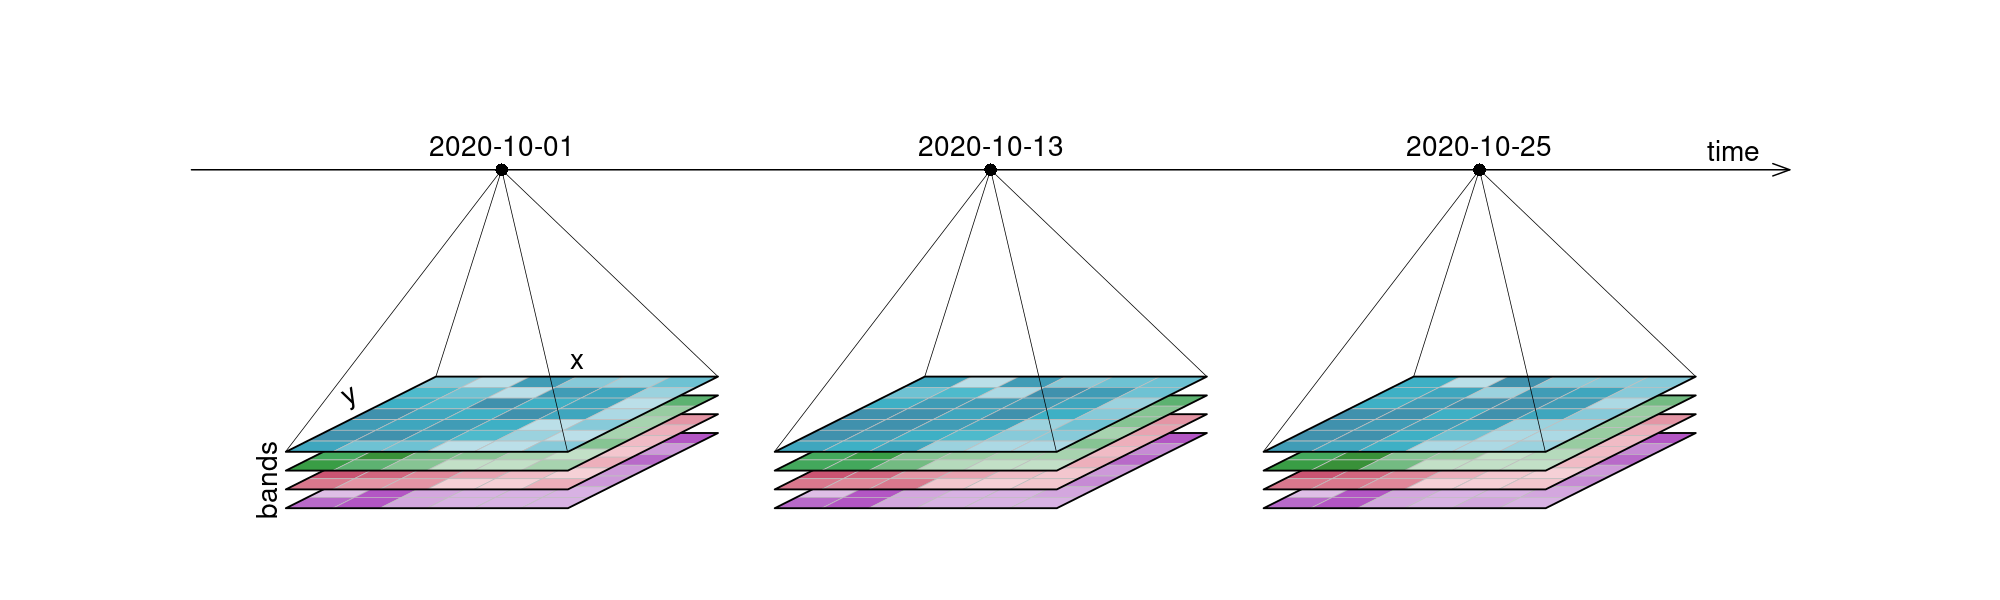 Raster datacube timeseries: 12 imagery tiles are depicted, grouped by 3 dates along a timeline (time dimension). Each date has a blue, green, red and near-infrared band (bands dimension). Each single tile has the dimensions x and y (spatial dimensions).